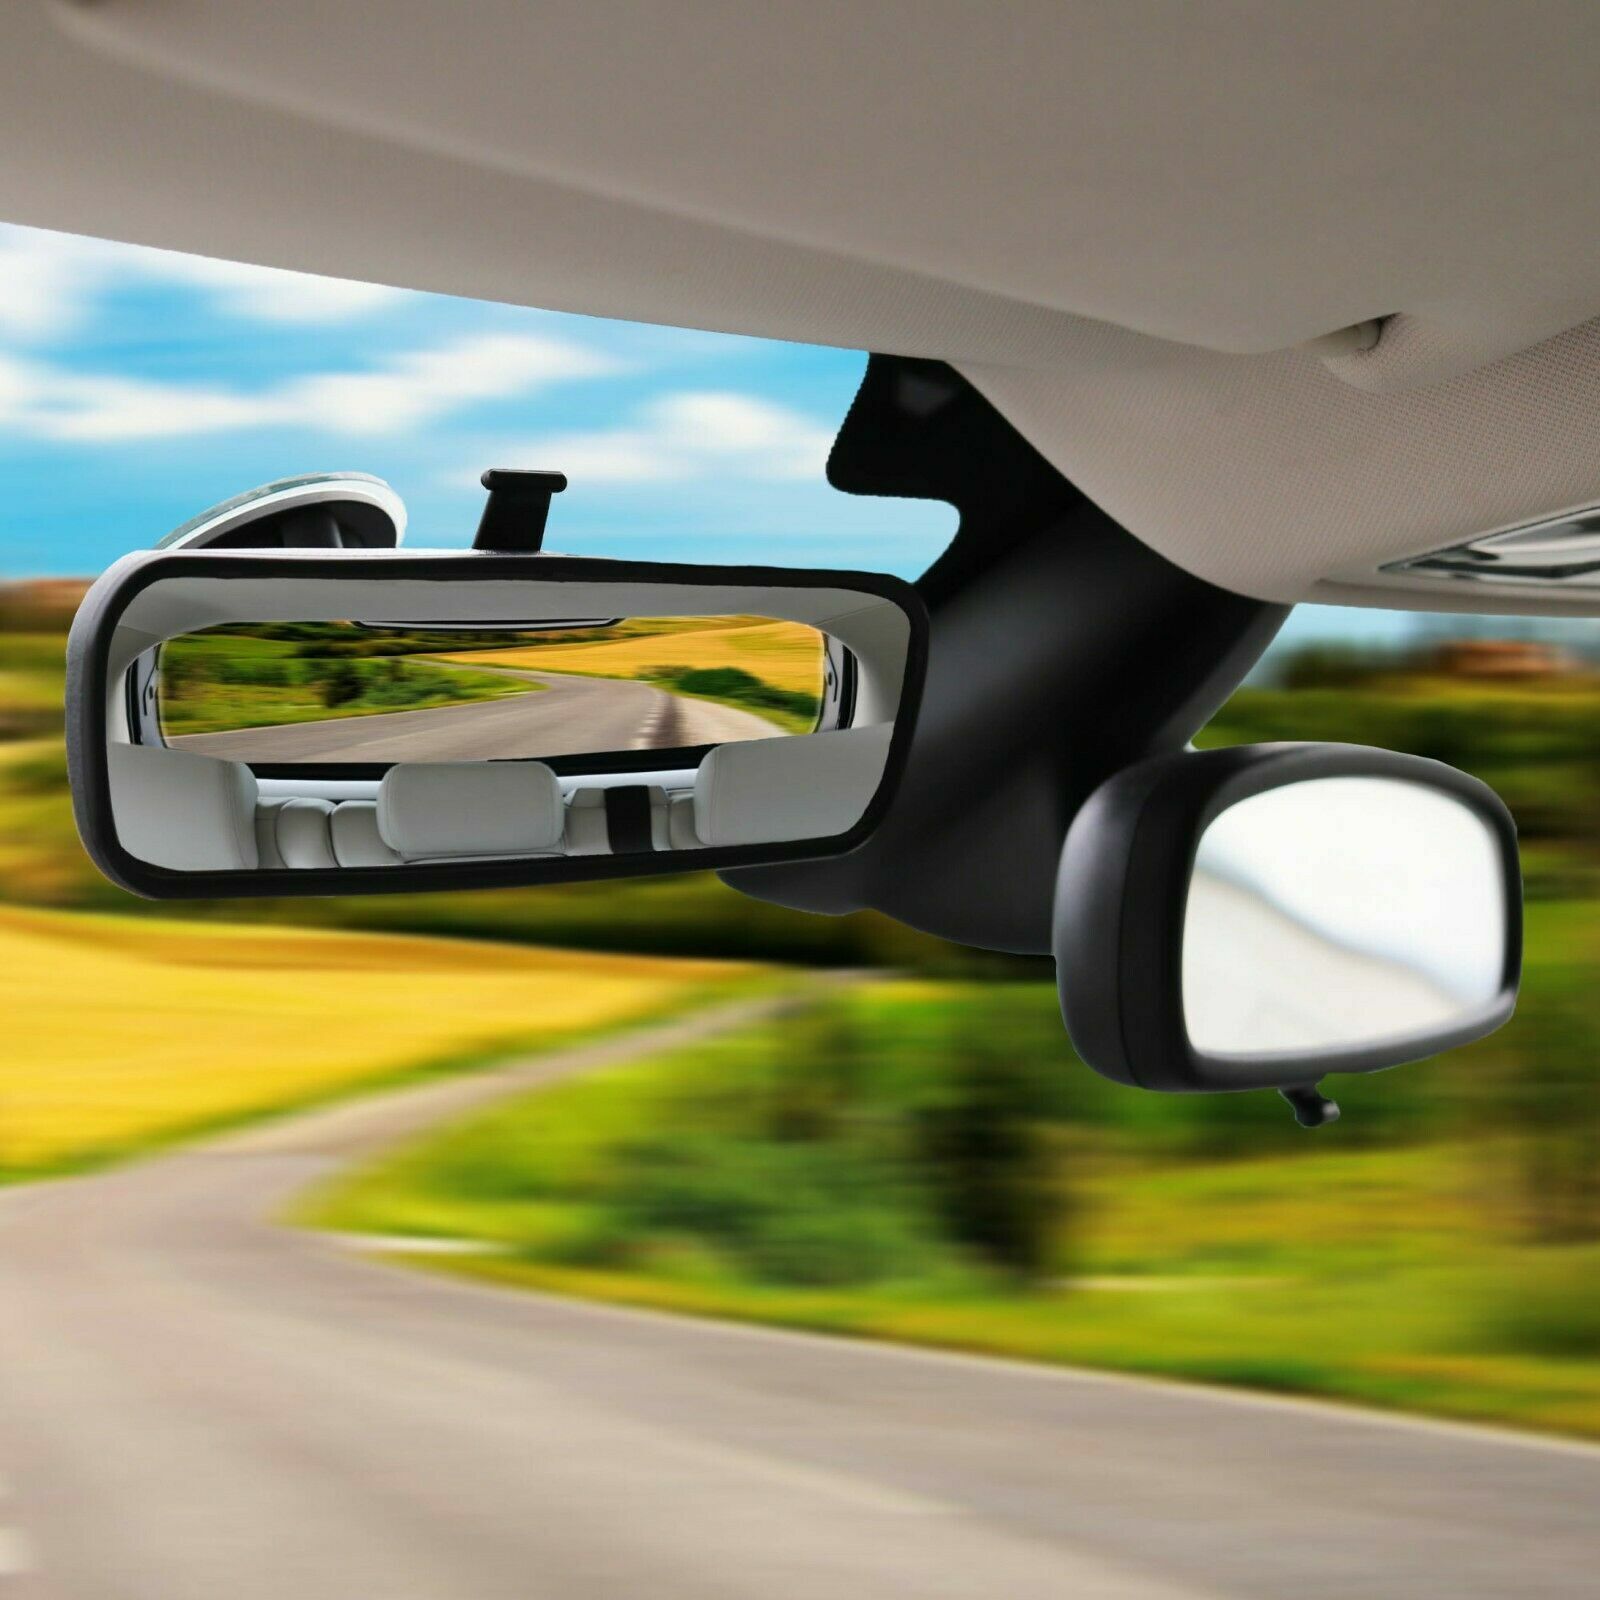 Drivers stunned to learn what the 'secret' button on rear view mirror is  really for